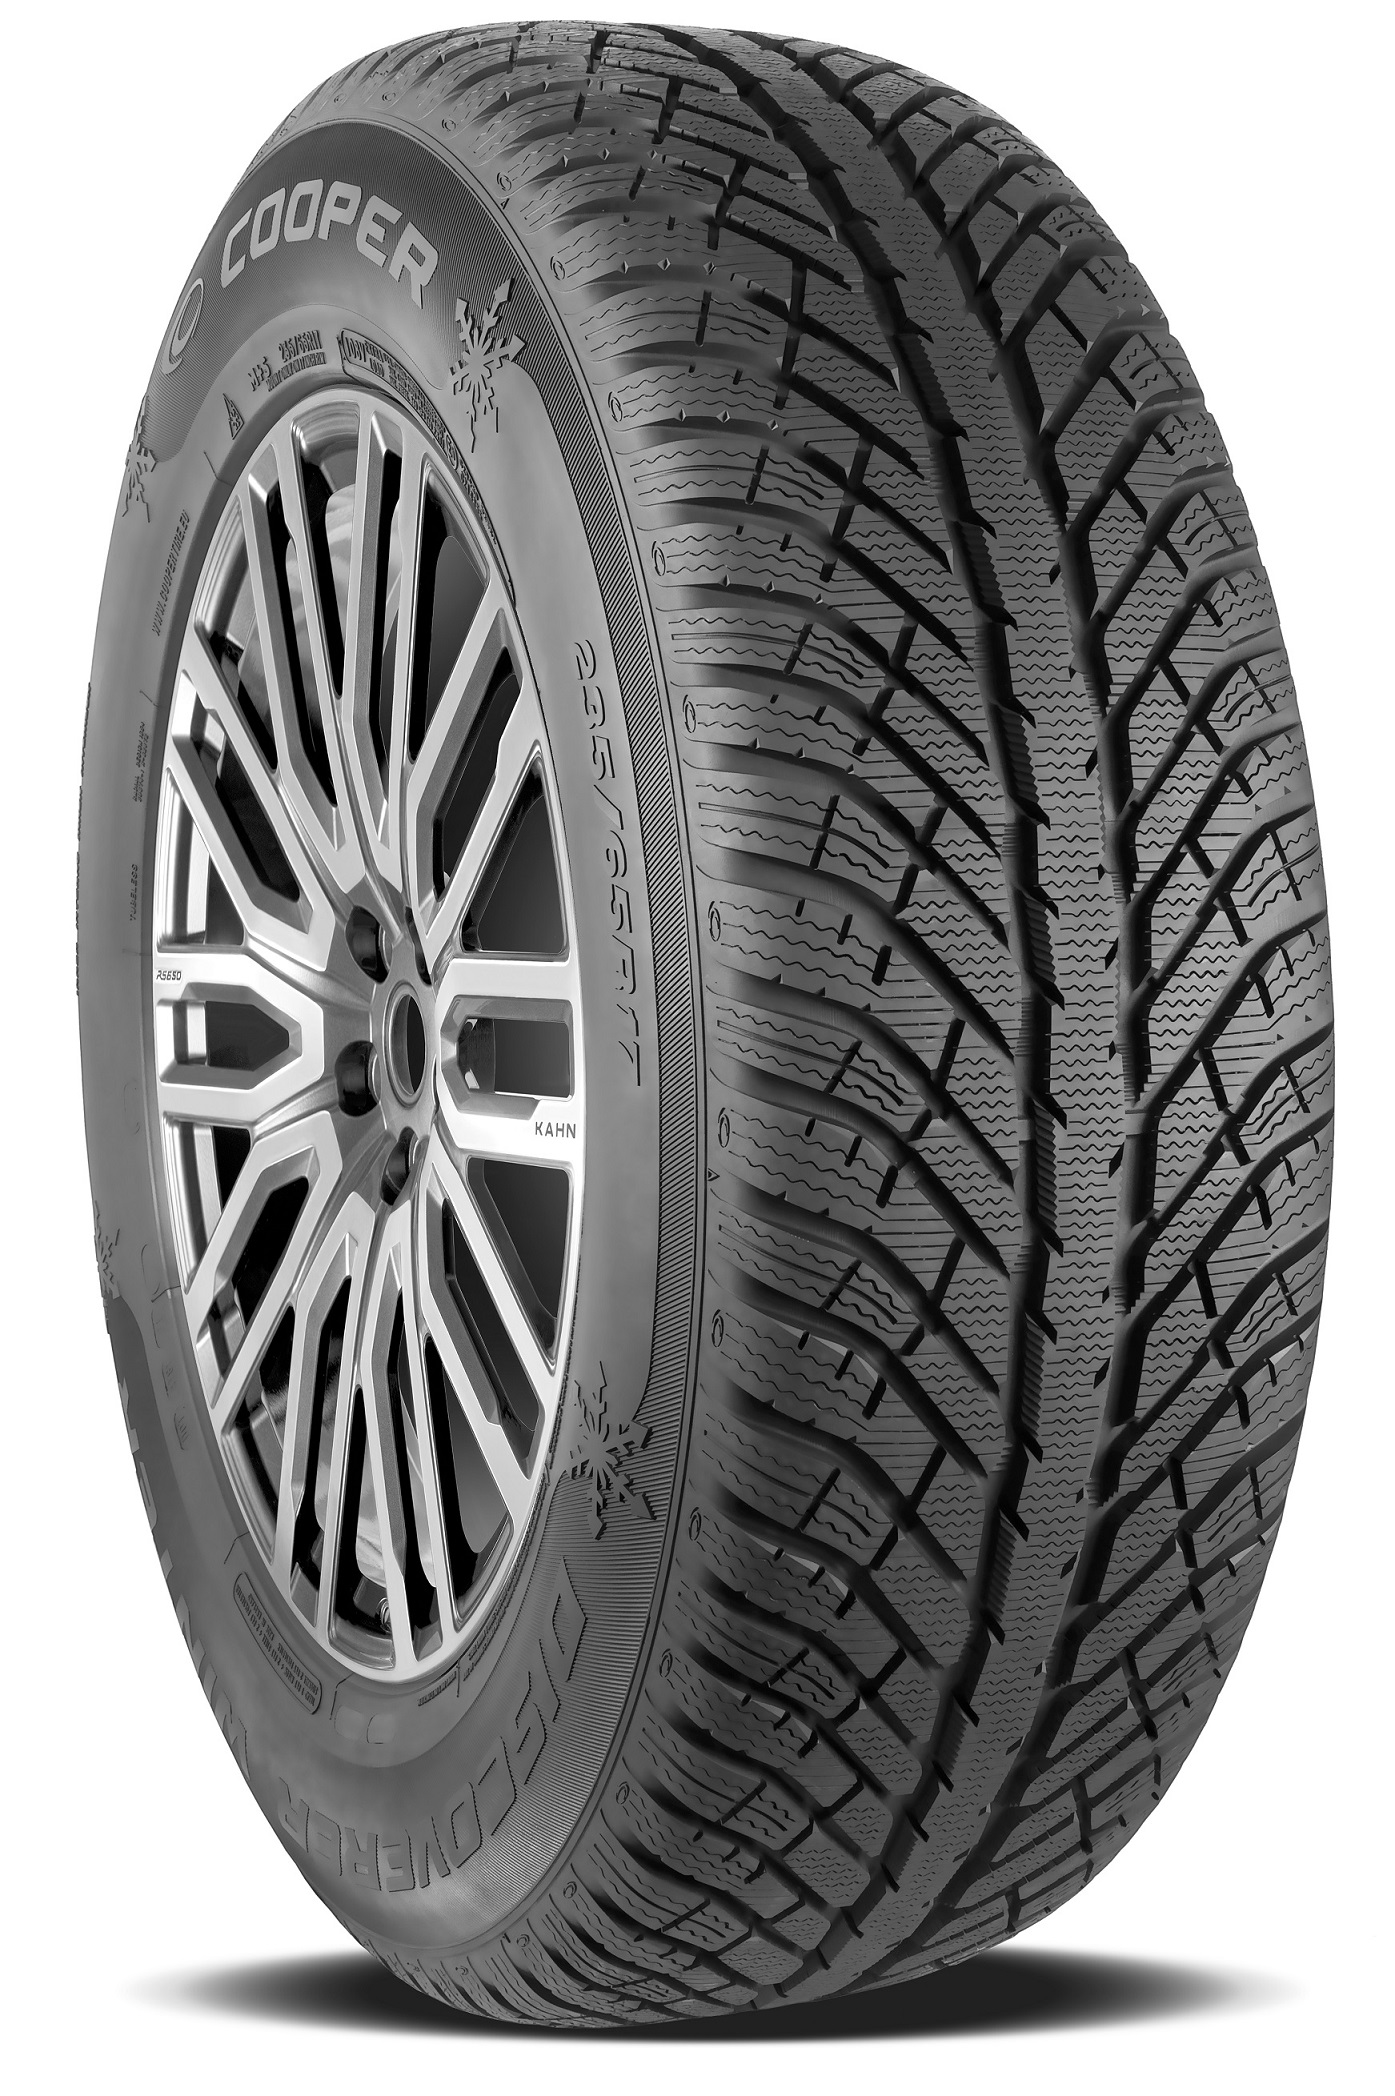 Gomme Nuove Cooper Tyres 205/45 R17 88V DISCOVERER WINTER XL M+S pneumatici nuovi Invernale